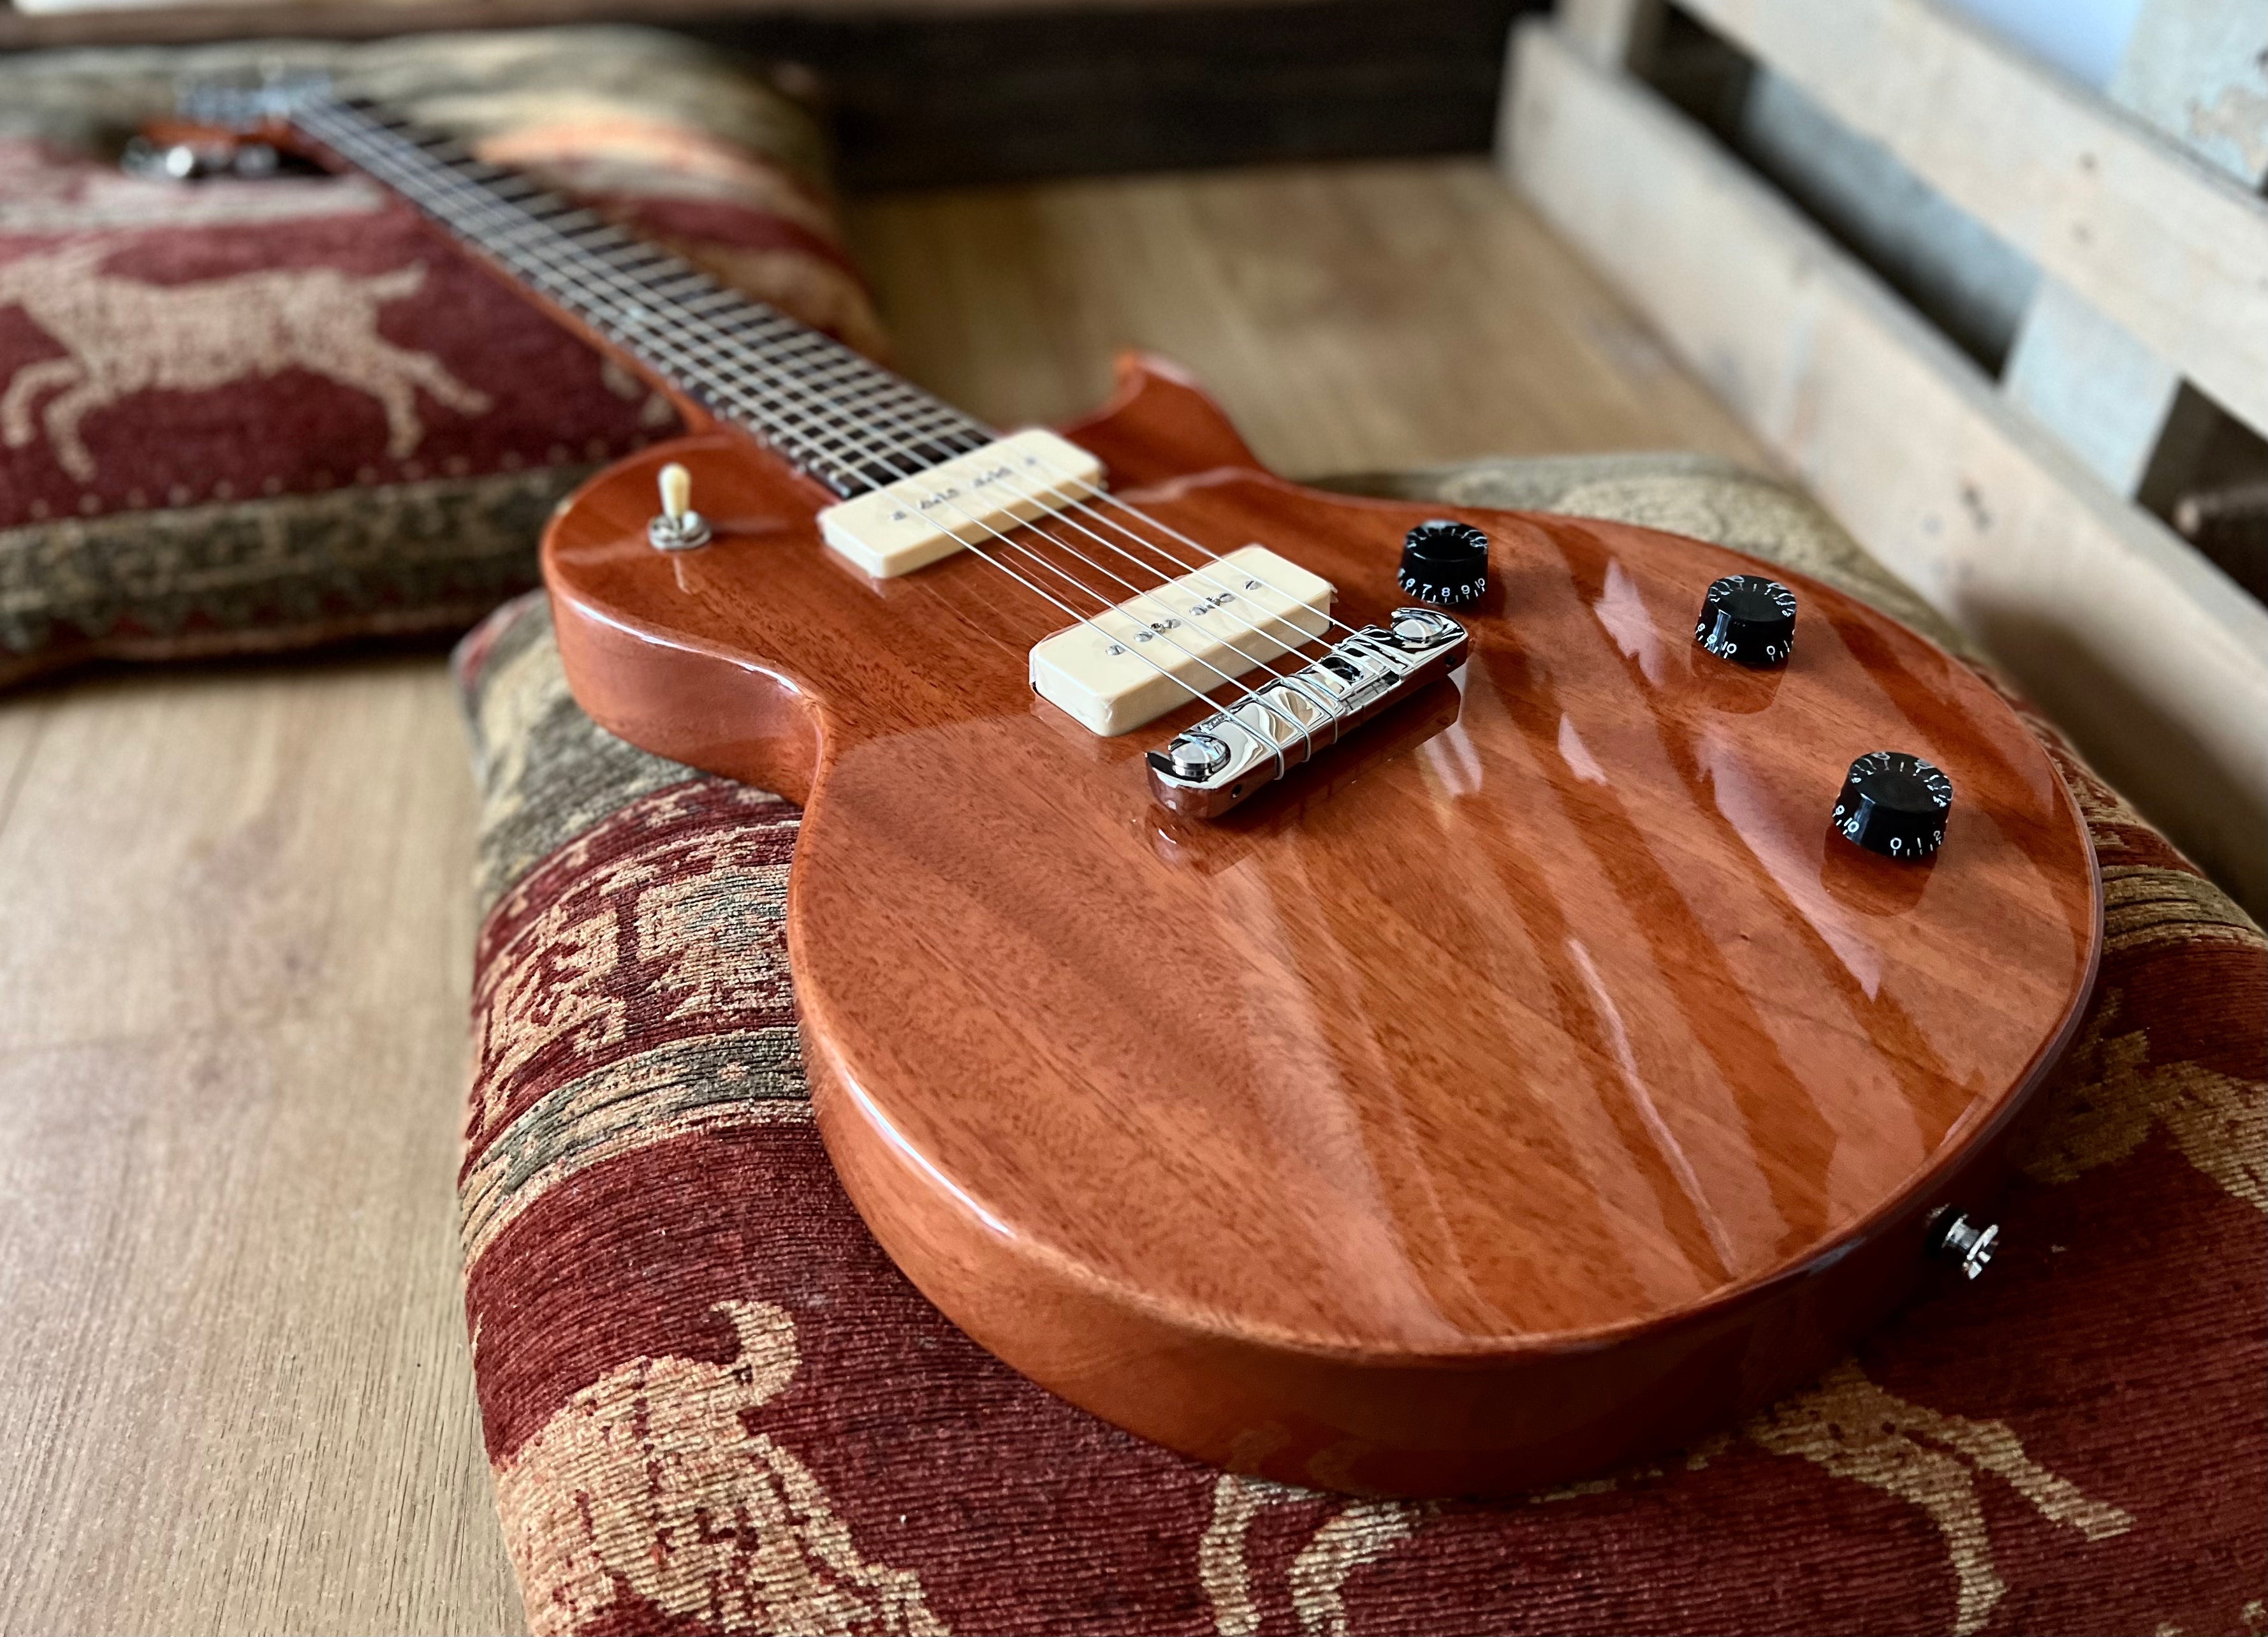 FRET KING ECLAT STANDARD GUITAR - NATURAL MAHOGANY  (Includes Our £85 Pro Setup Free), Electric Guitar for sale at Richards Guitars.